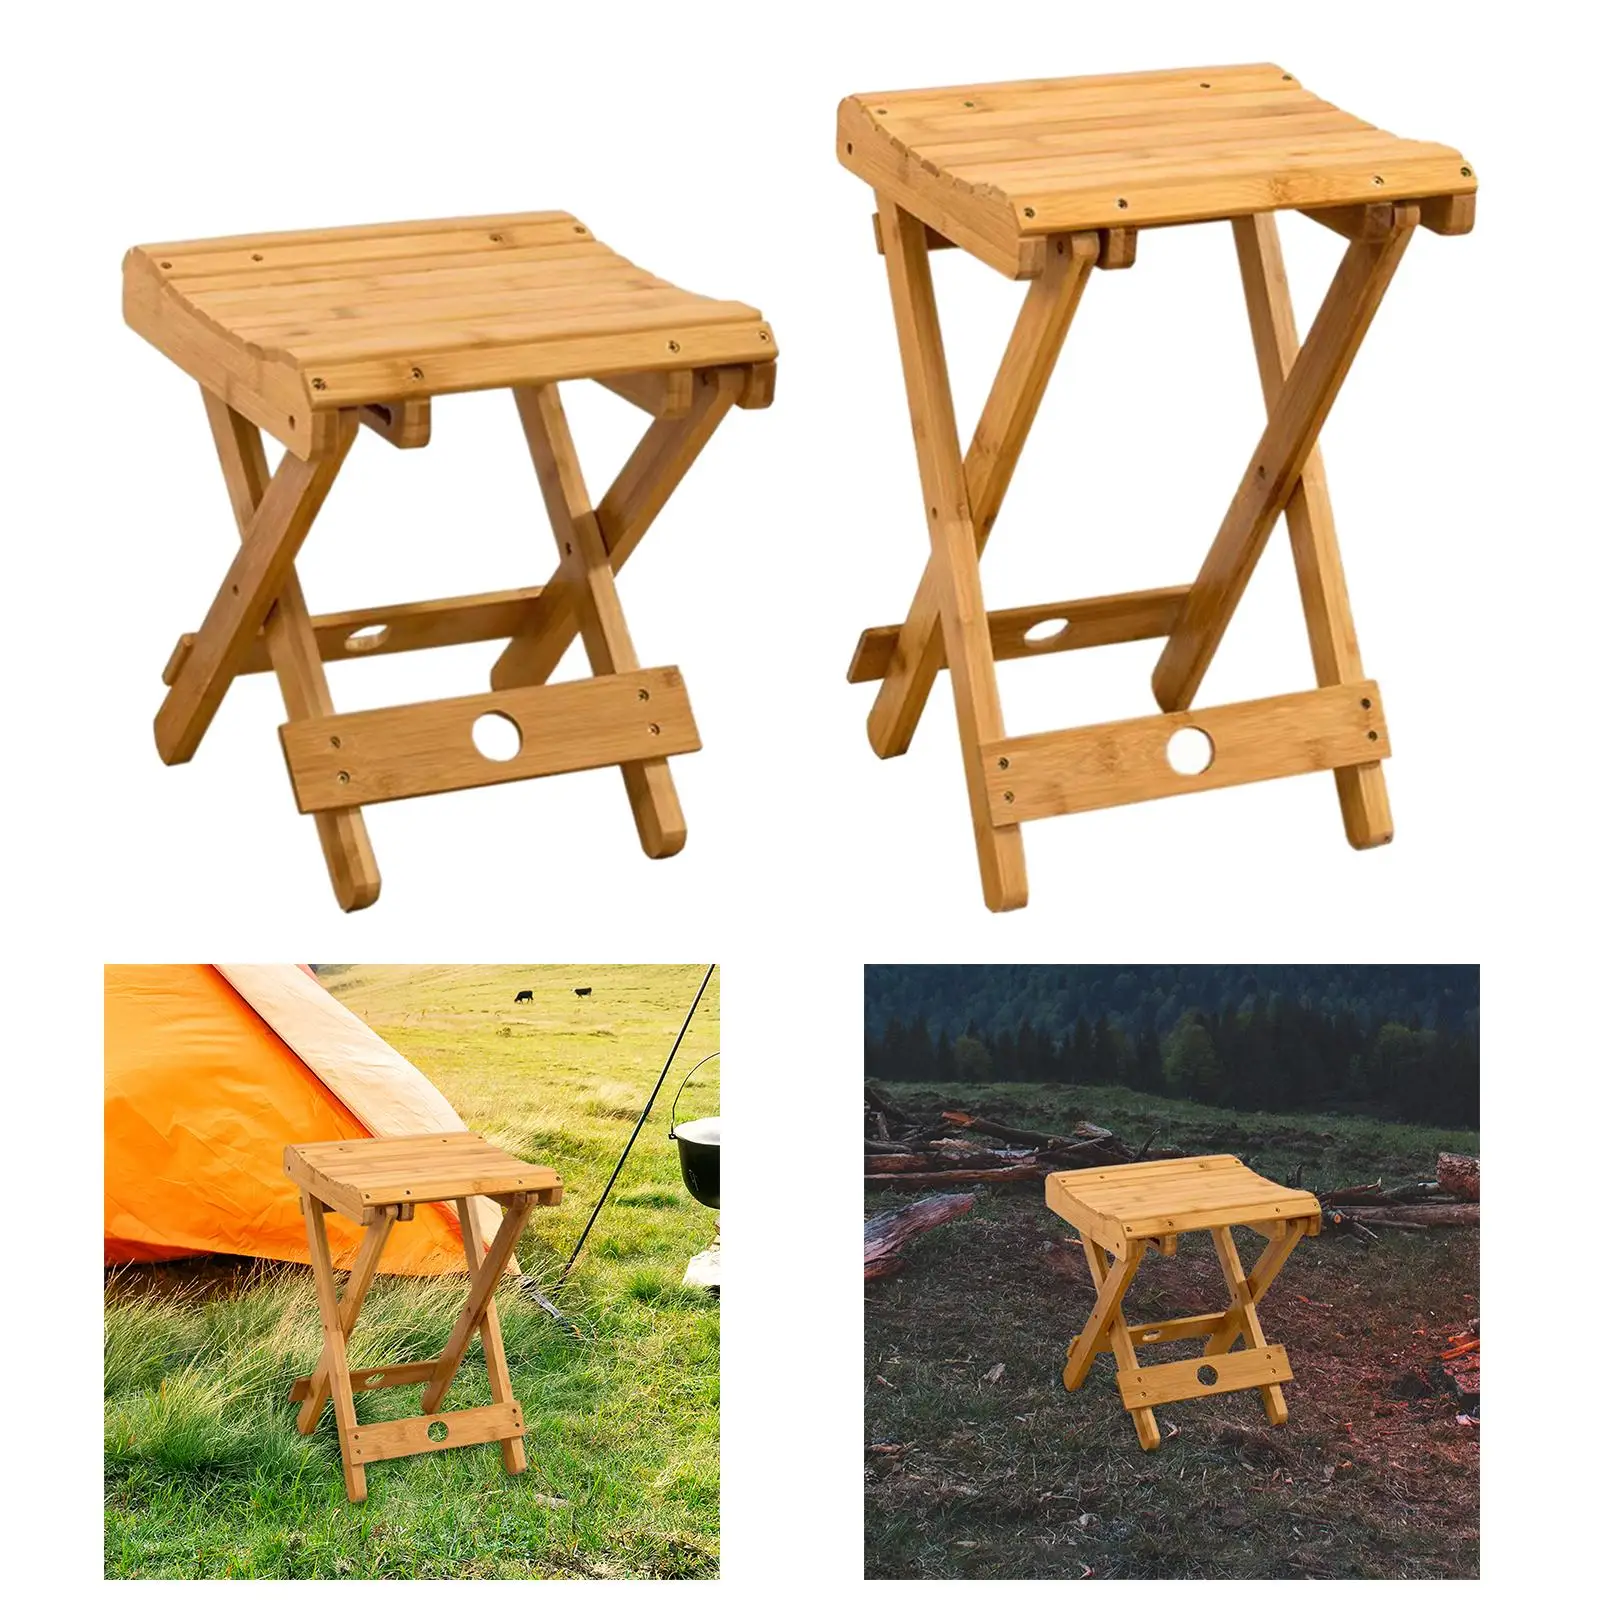 Folding Stool Collapsible Stool Portable Camping Chair for BBQ Beach Garden